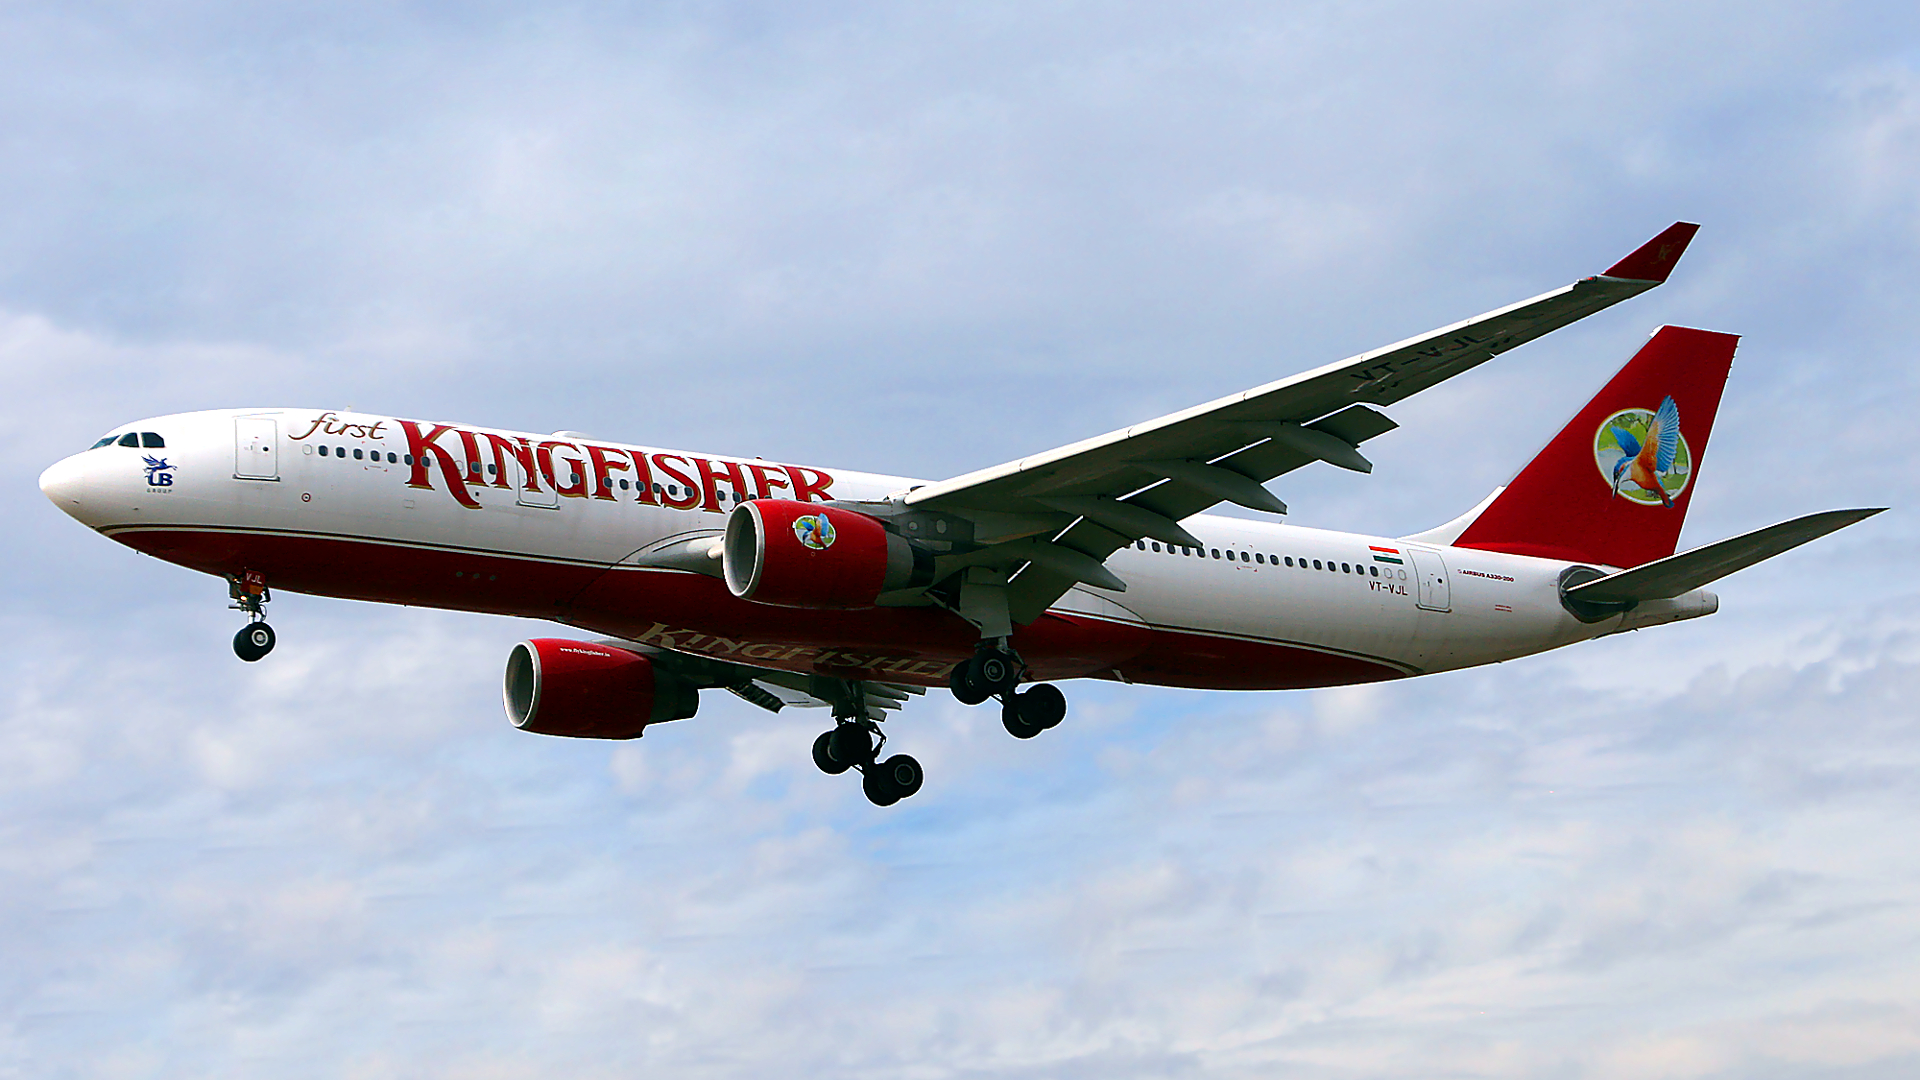 VT-VJL ✈ Kingfisher Airlines Airbus 330-223 @ London-Heathrow